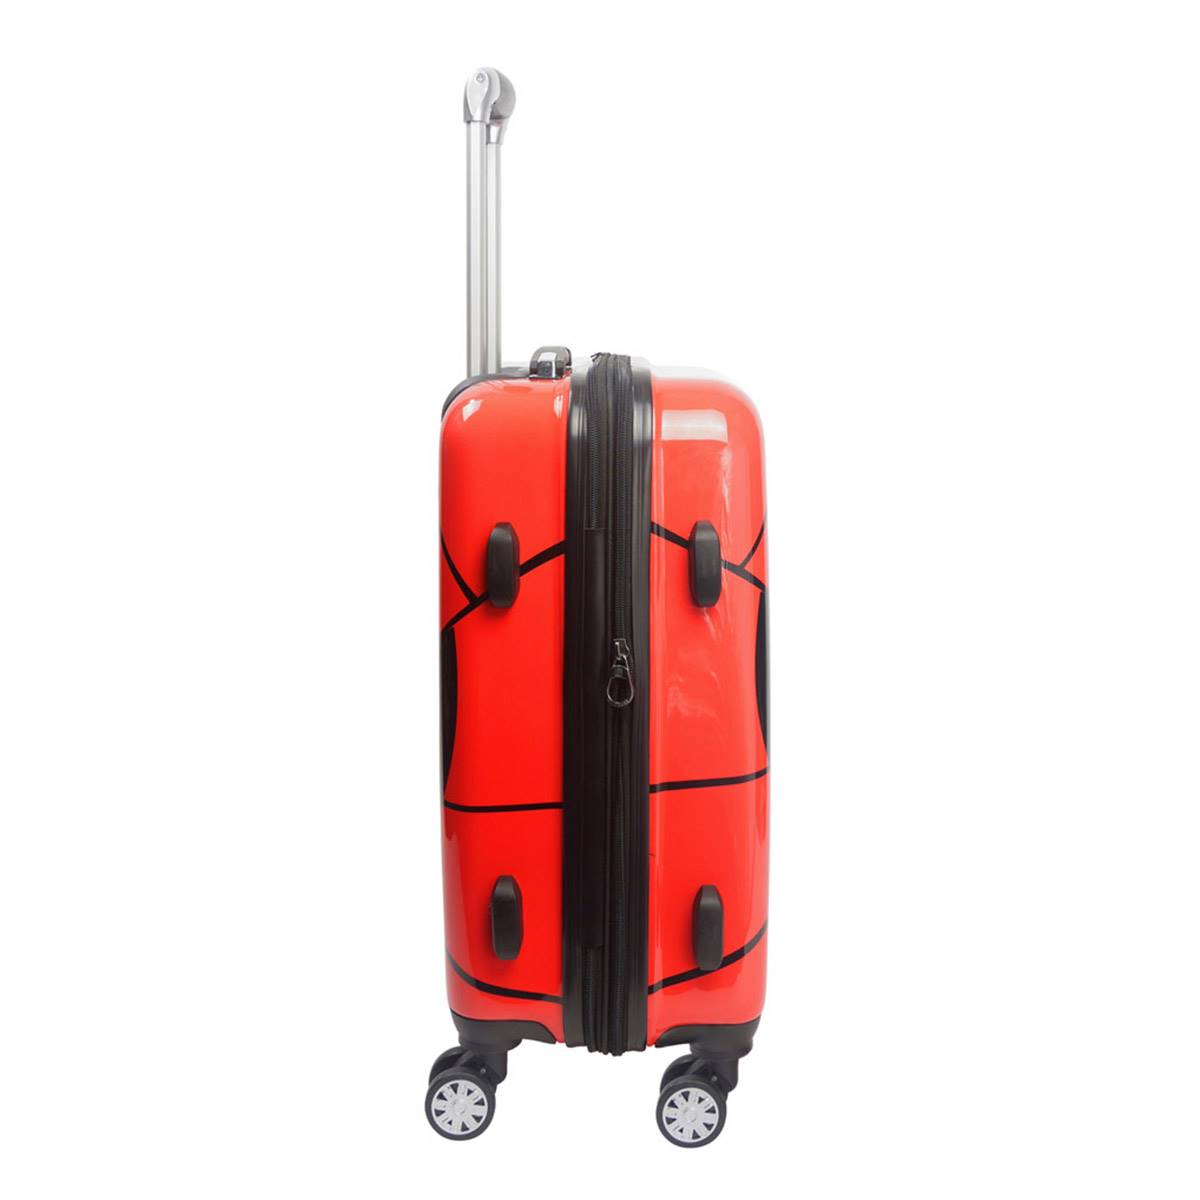 FUL Marvel 21in. Spider-Man Hardside Carry-On Luggage